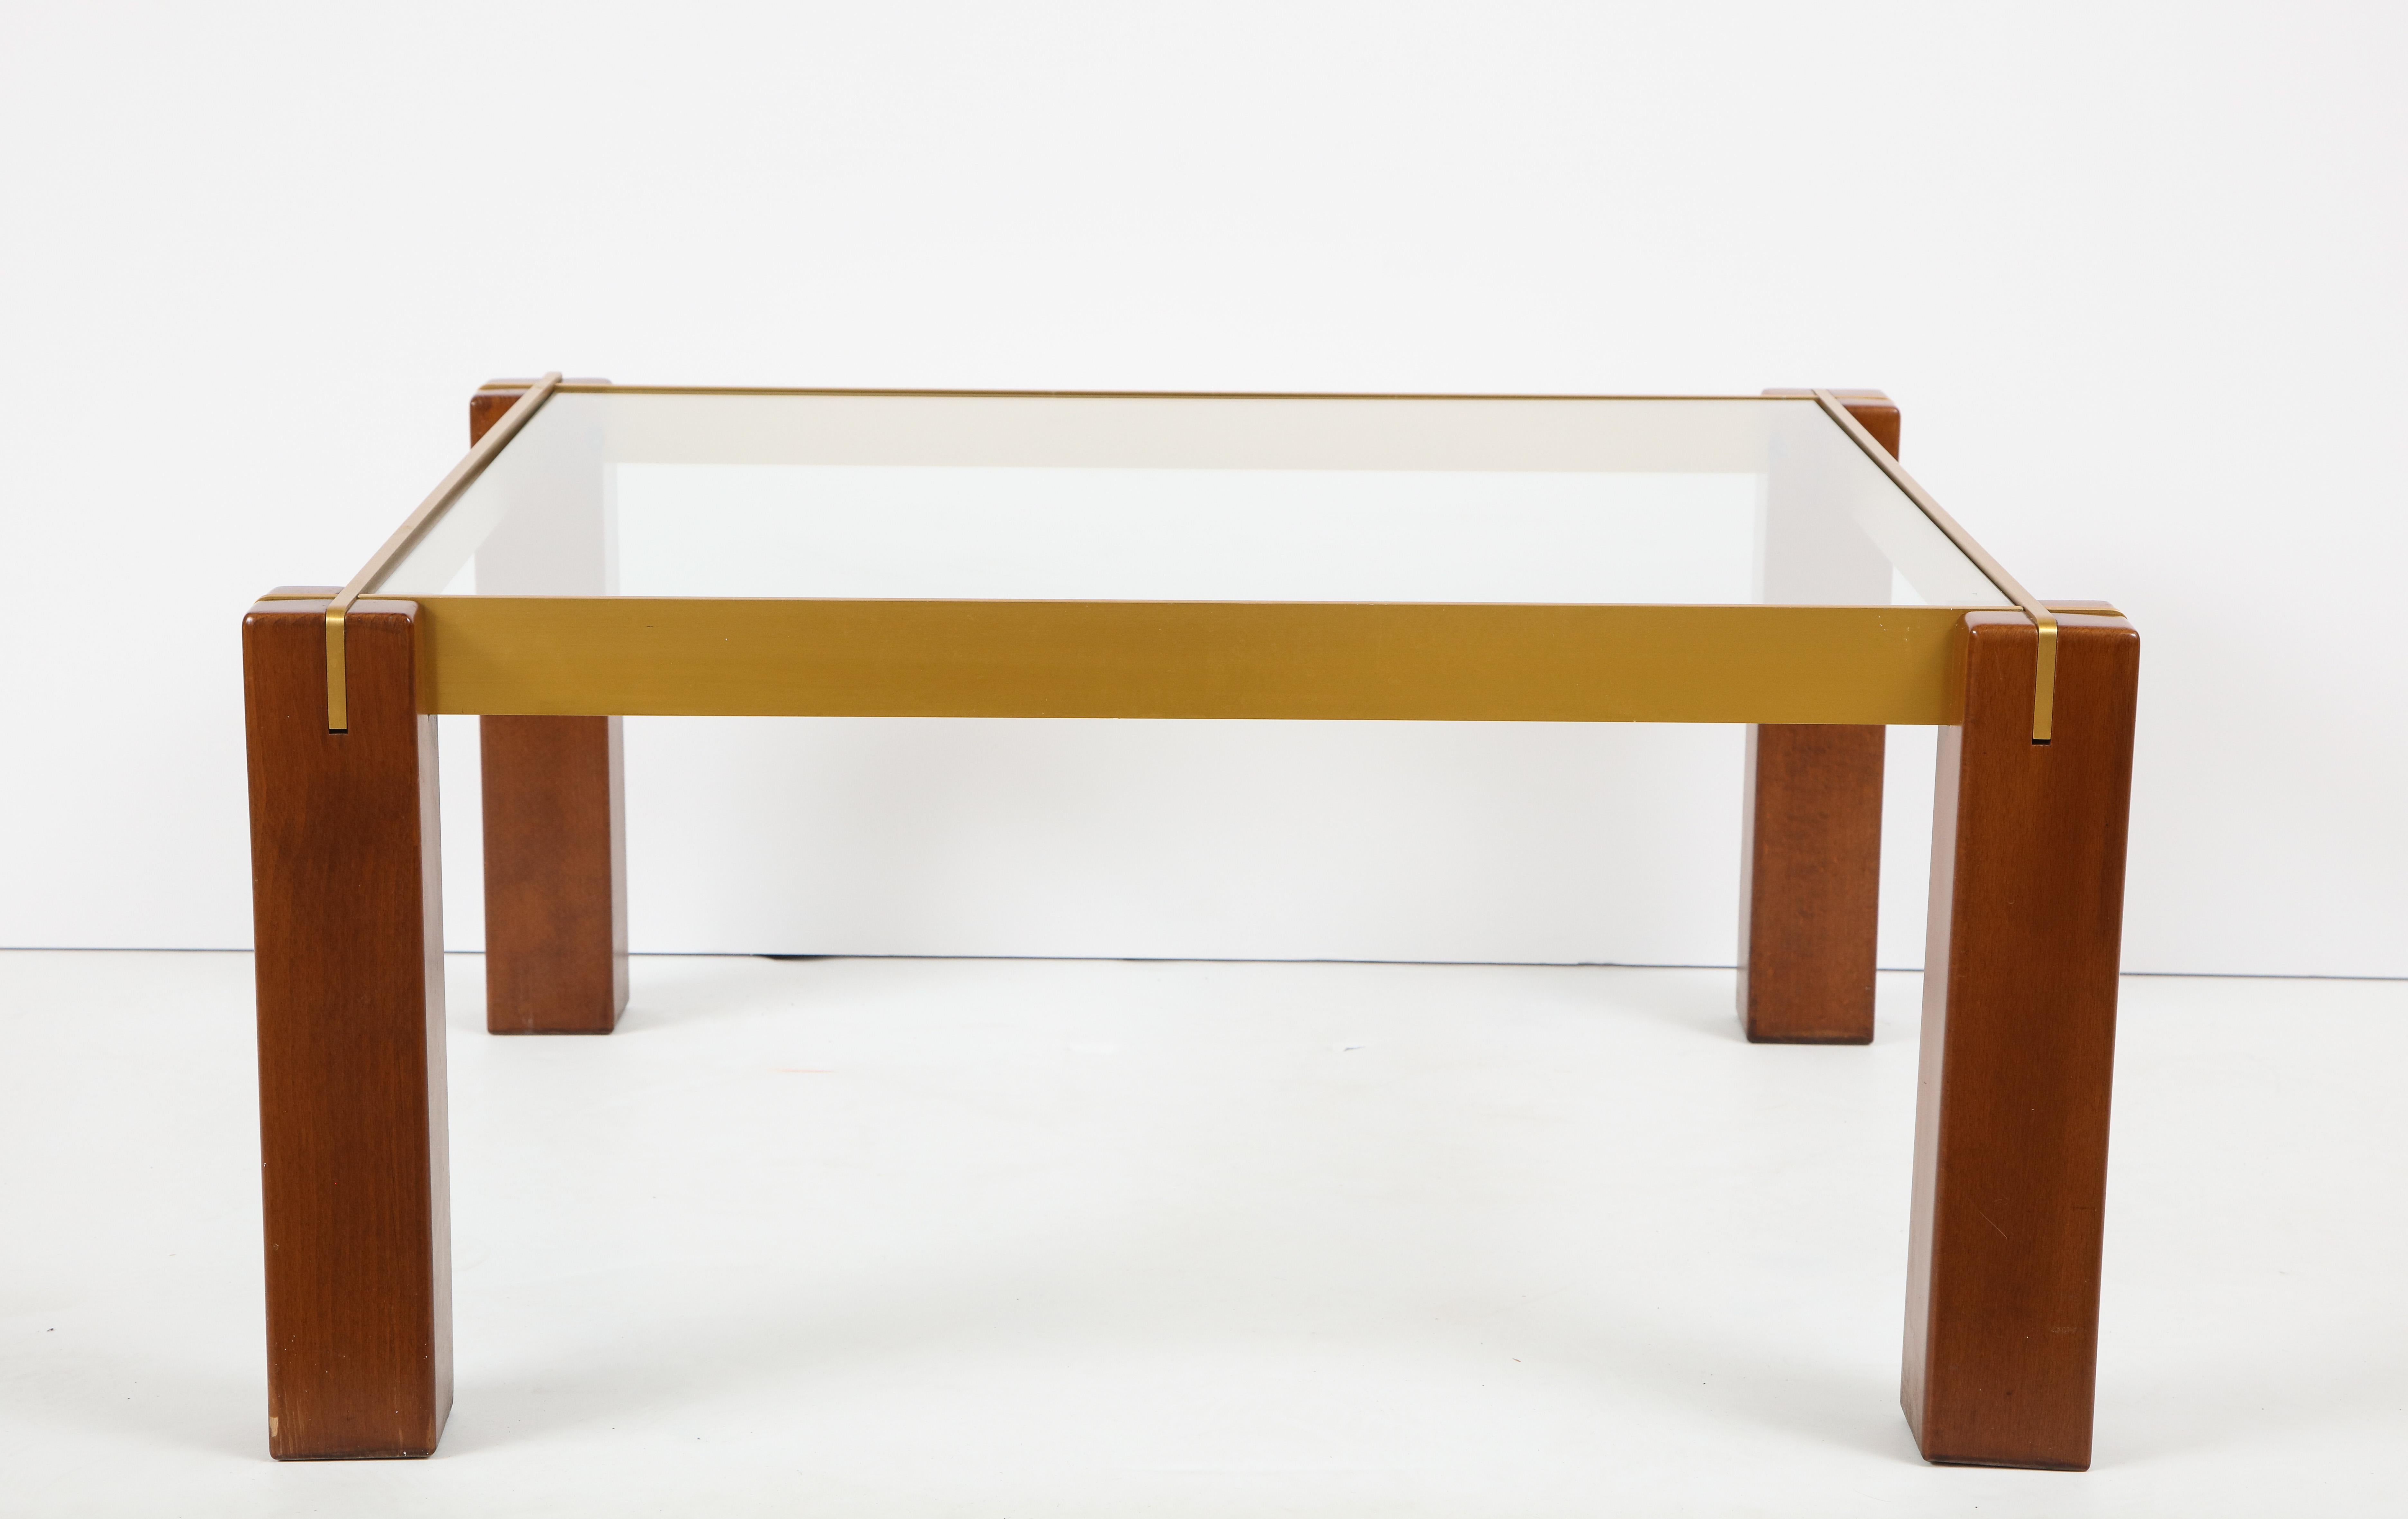 Italian 1970s walnut and gilt brass coffee table with gilded brass side fittings to secure and display a chic X formed design.
Italy, circa 1970s
Size: 14 1/2